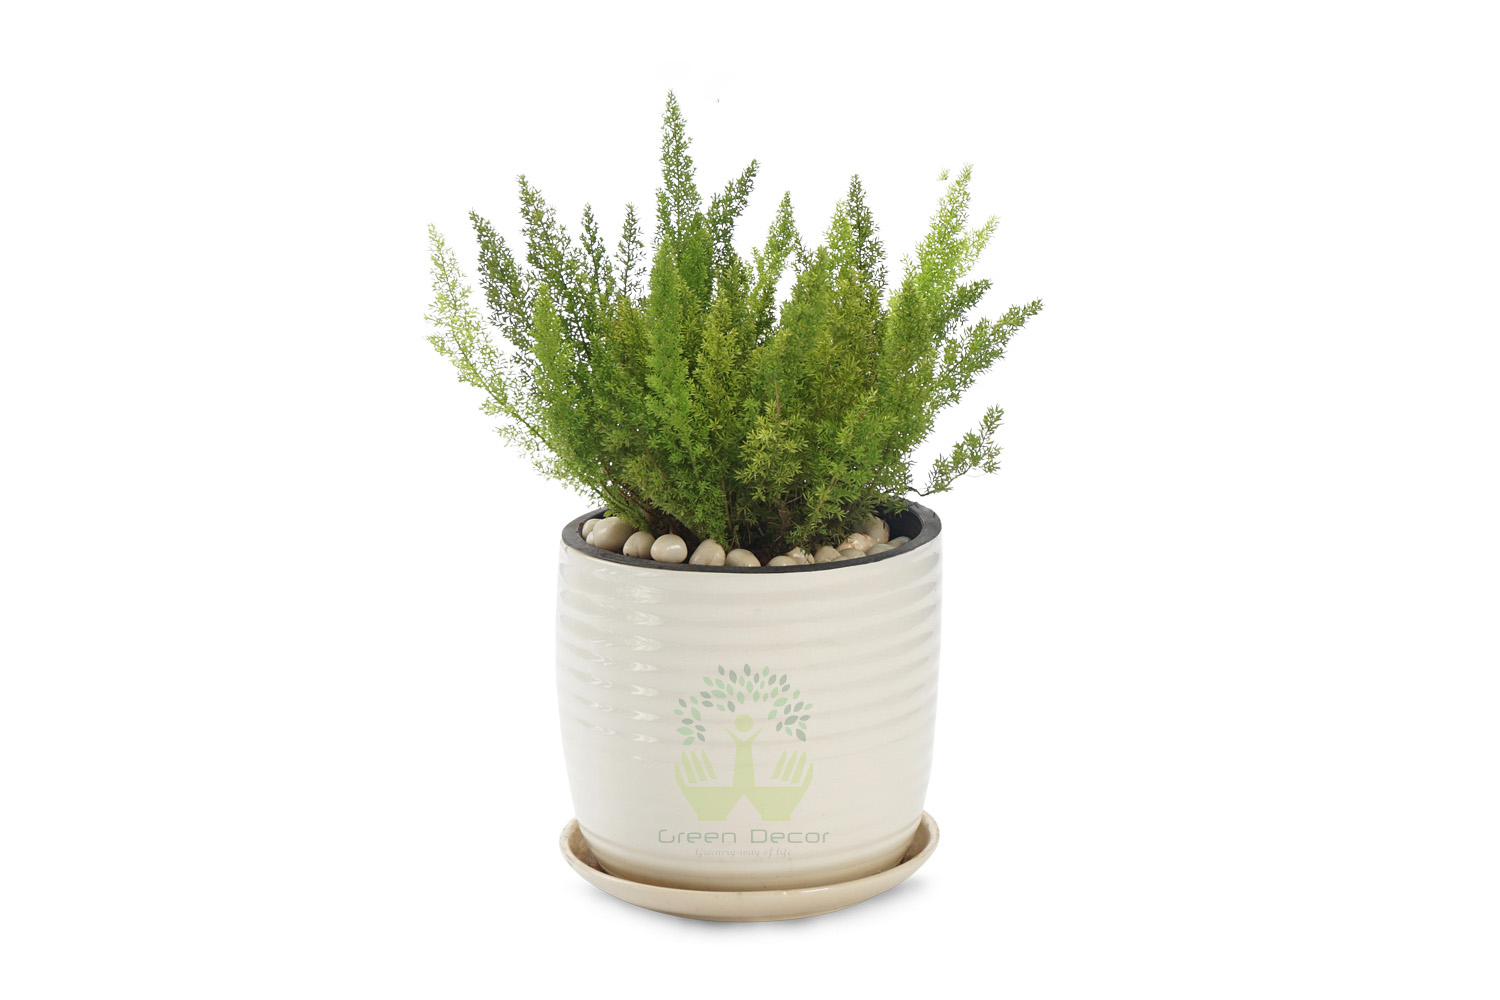 Buy Foxtail Fern Plants , White Pots and seeds in Delhi NCR by the best online nursery shop Greendecor.